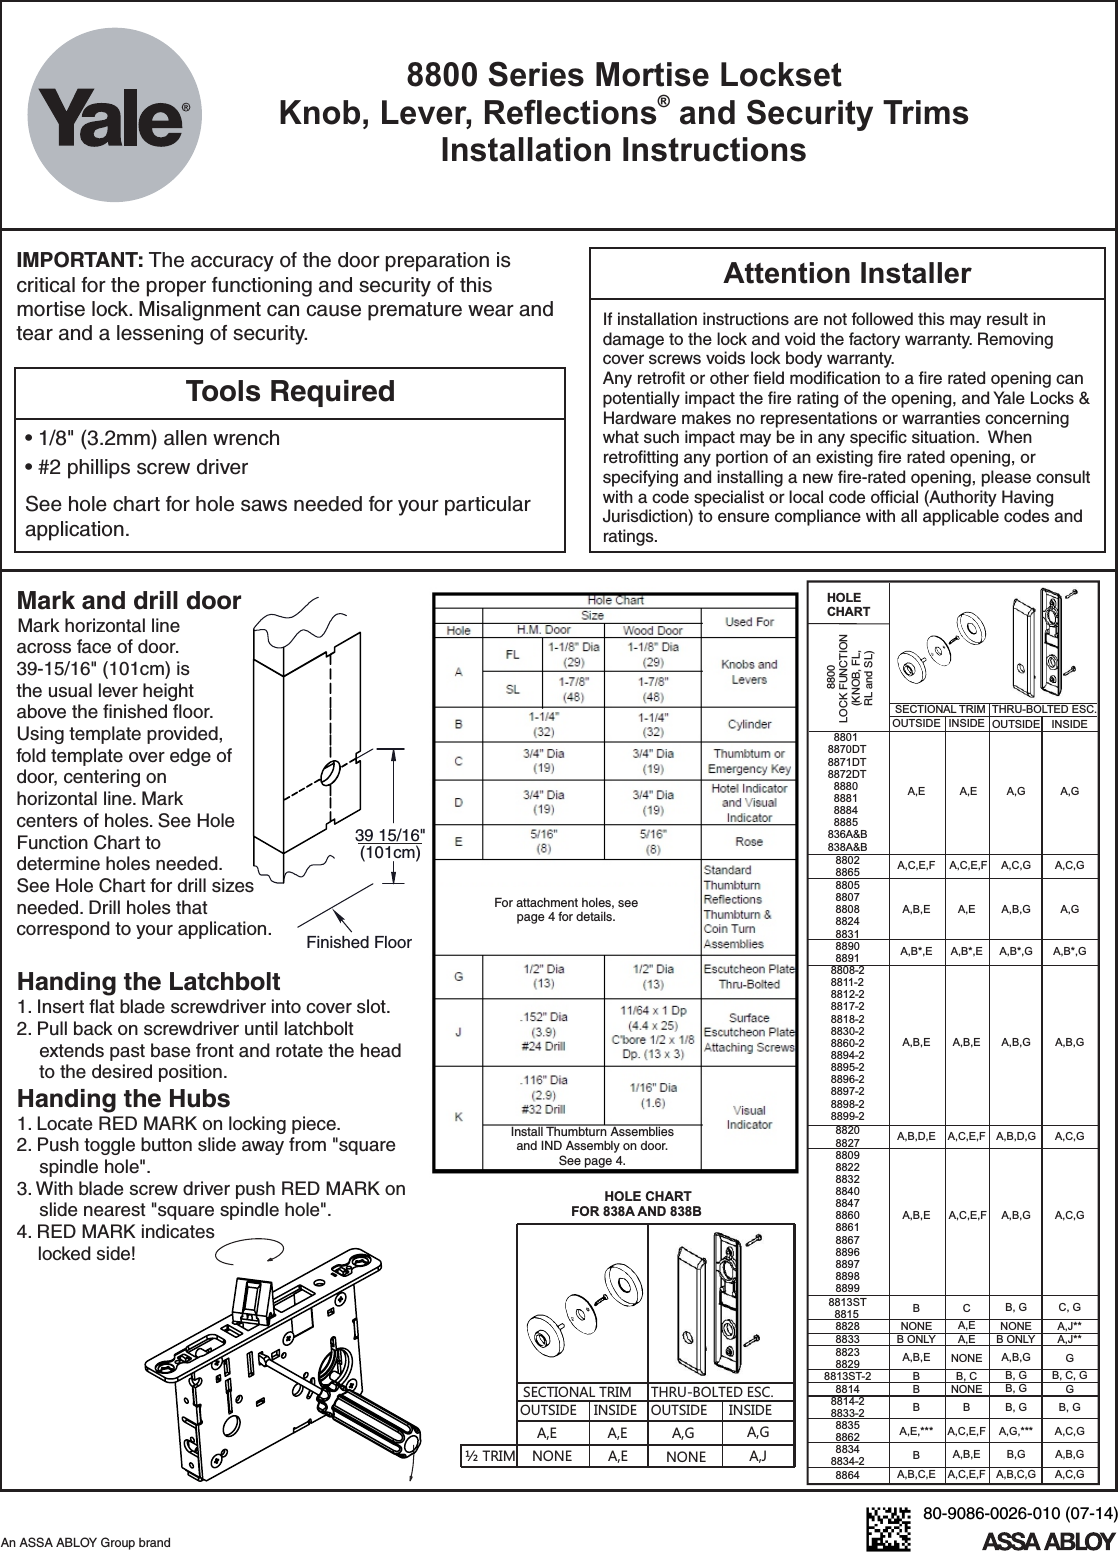 Page 1 of 8 - Yale  8800 Series Mortise Lock Installation Instructions 80-9086-0026-0108800Mortise